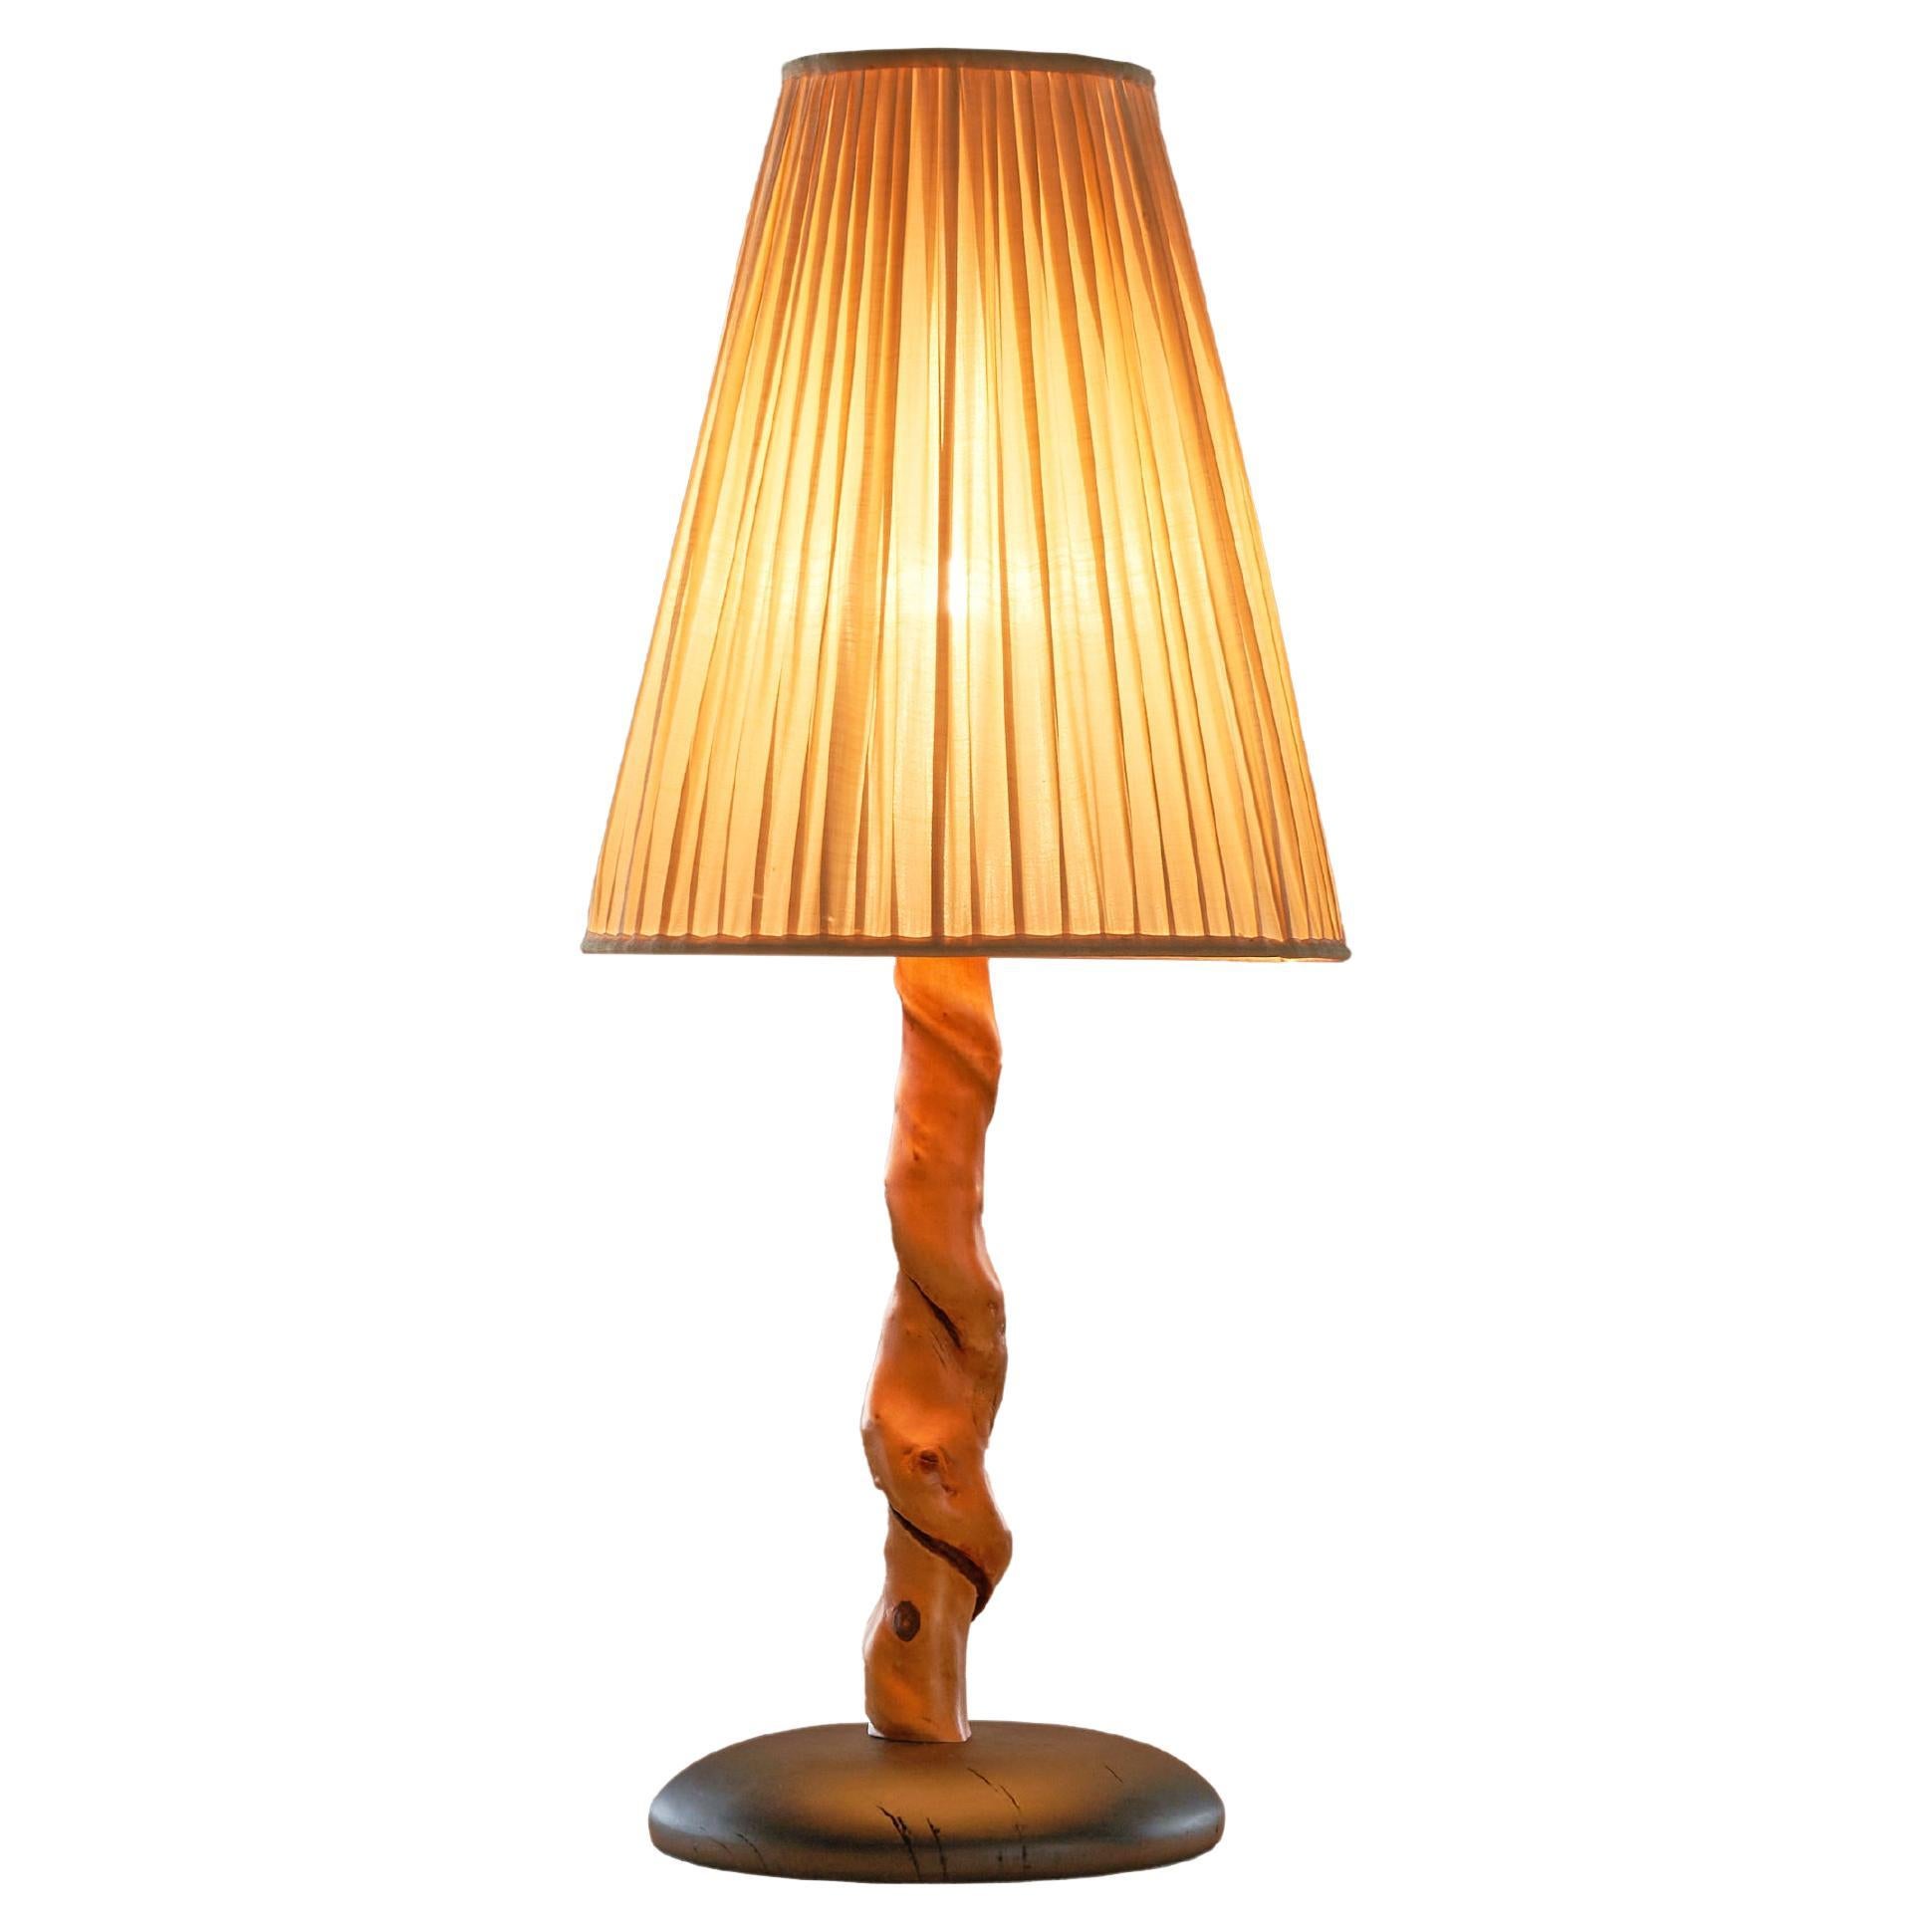 Tree Trunk Table Lamp in Acacia, Oak and Linen, 1950s For Sale